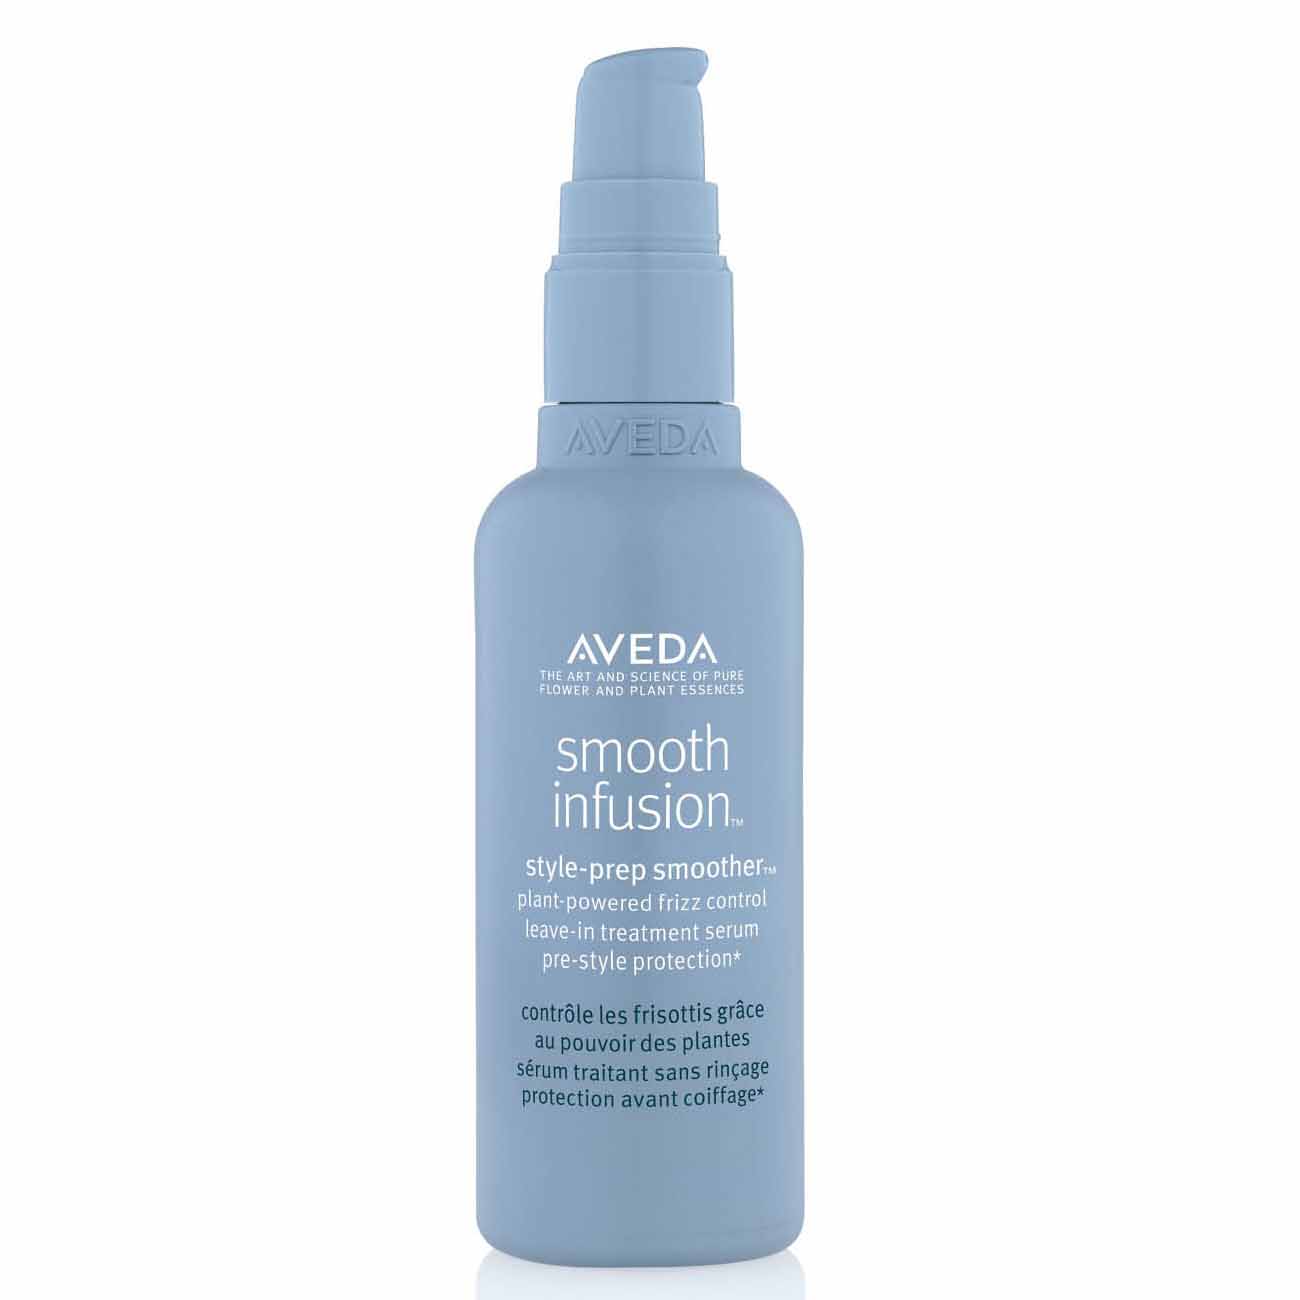 https://av-dashop.nl/wp-content/uploads/2022/07/Aveda-smooth-infusion-style-prep-smoother-100ml.jpg